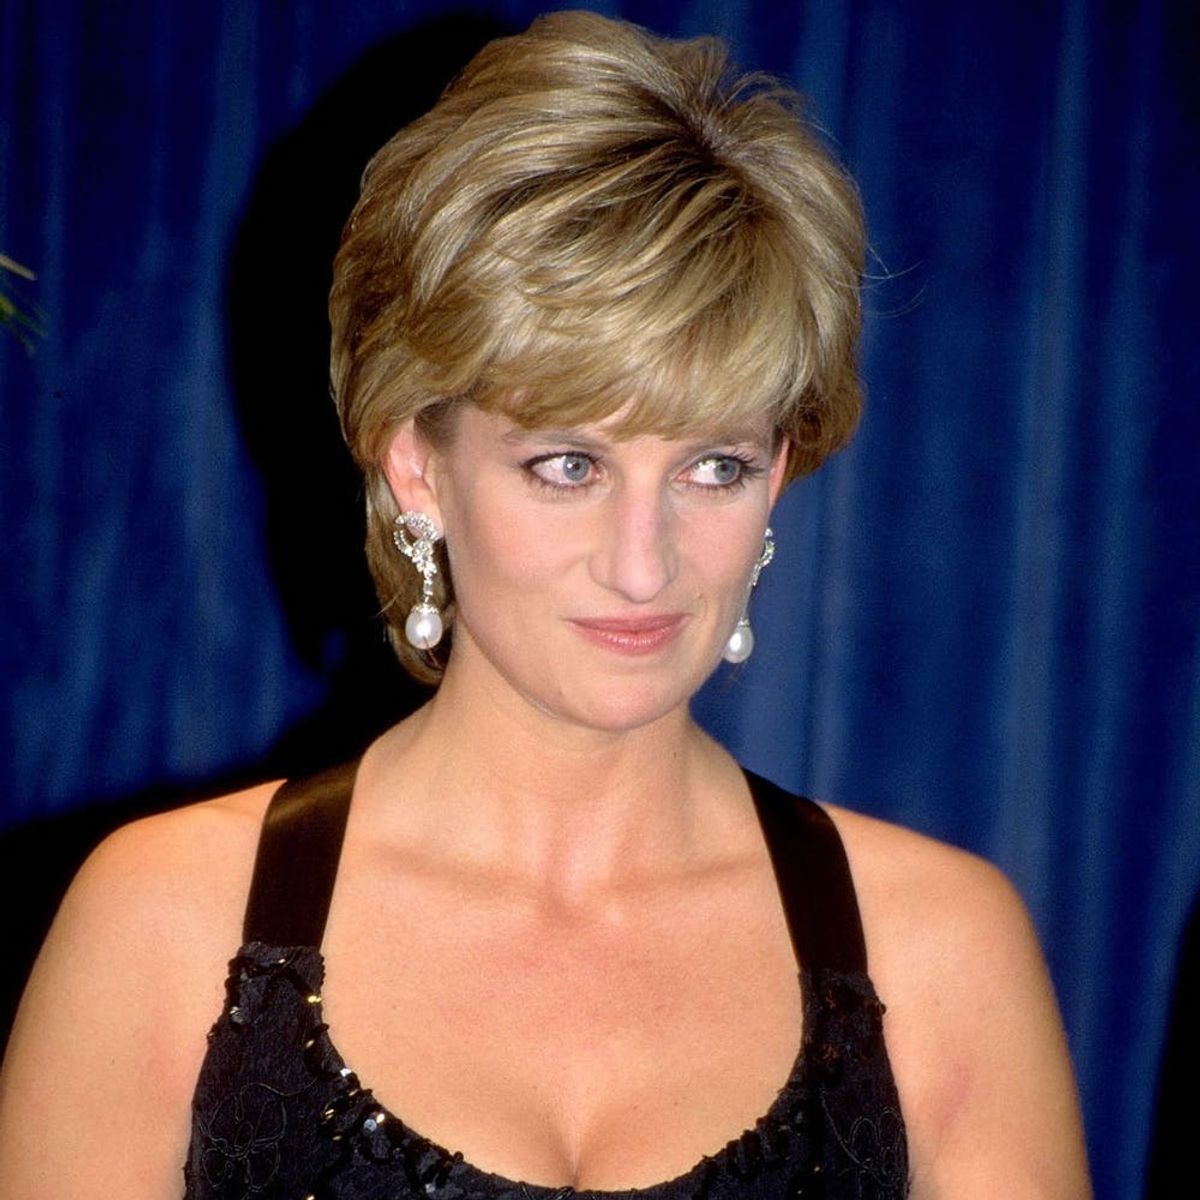 How the Royals Are Paying Tribute to Princess Diana on the 20th Anniversary of Her Death